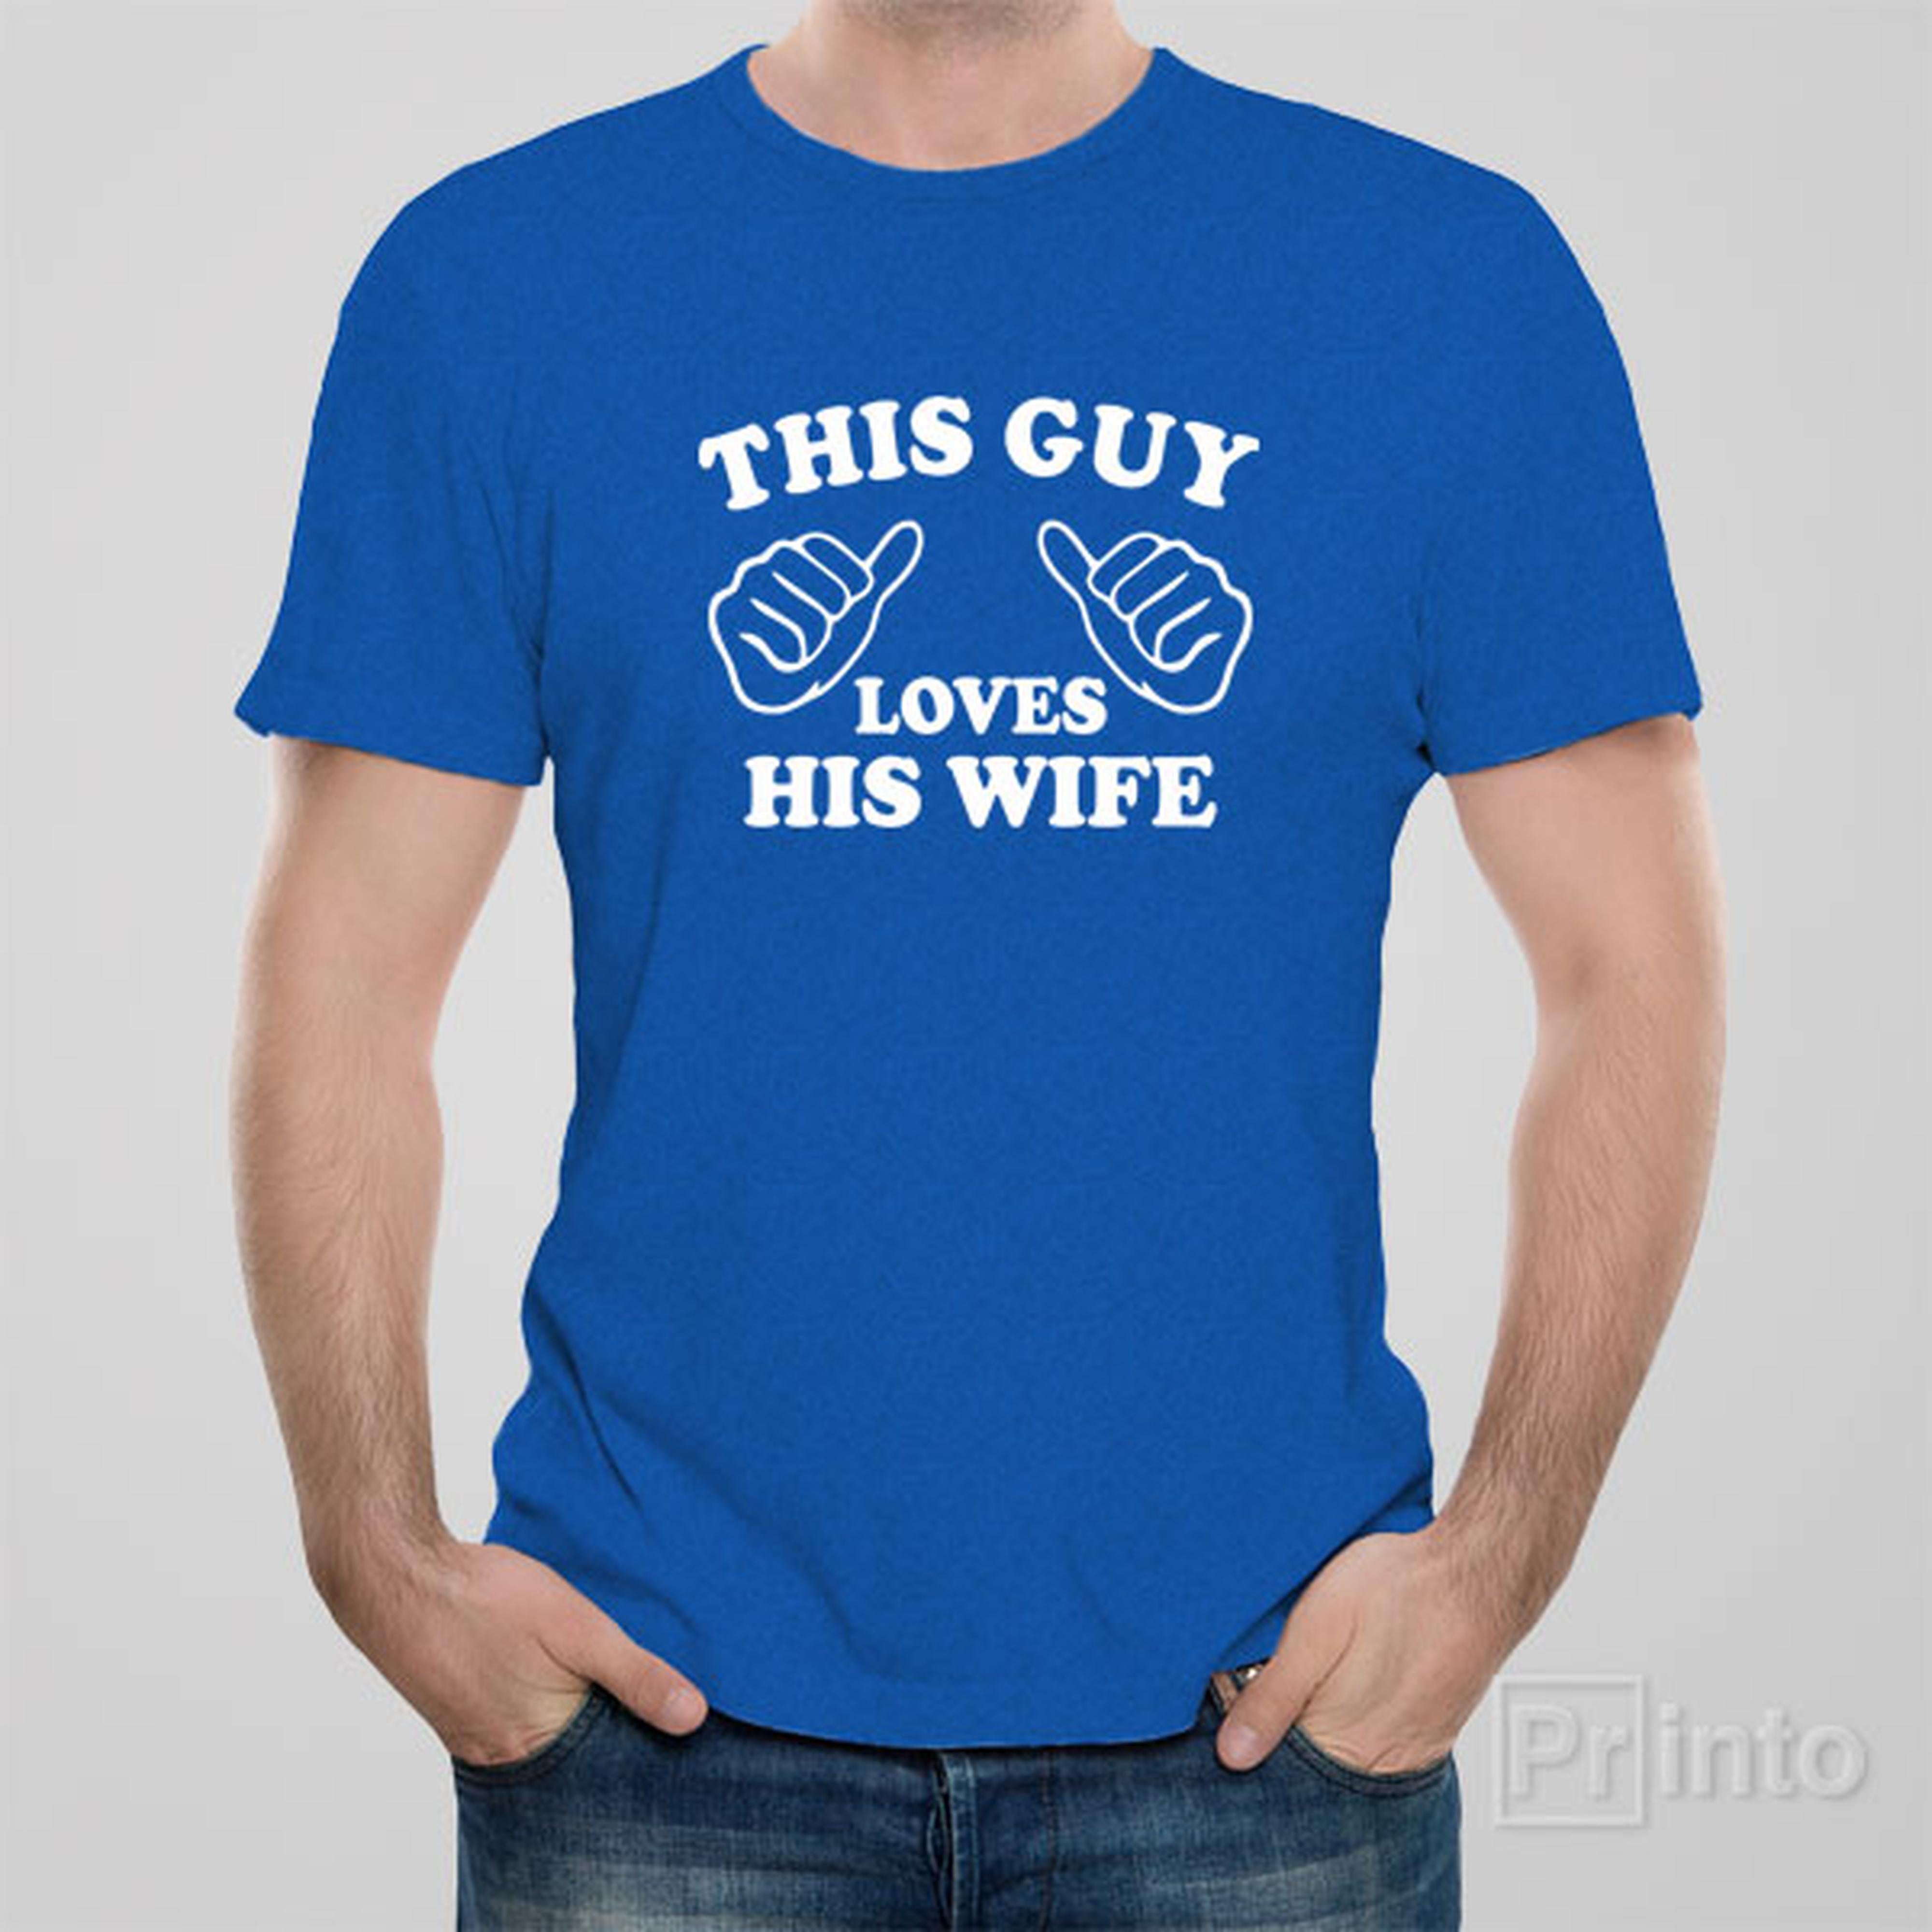 this-guy-loves-his-wife-t-shirt